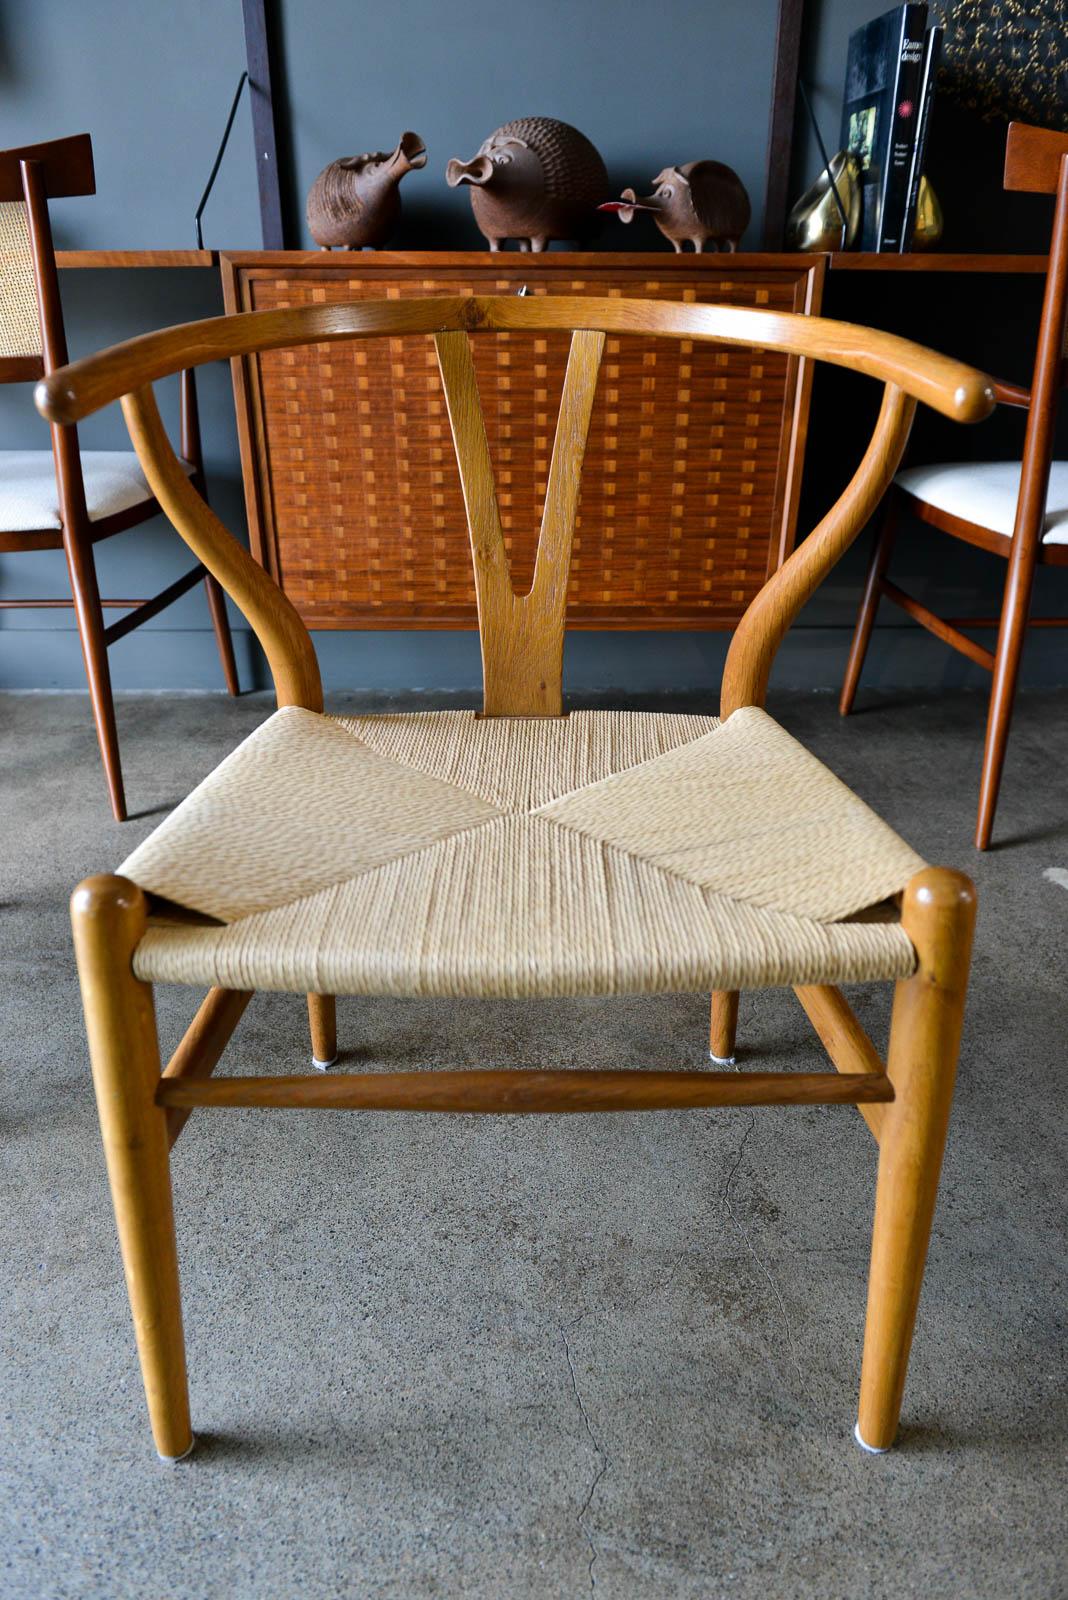 Set of 6 early original Hans Wegner CH24 Wishbone chairs, circa 1955. Hard to find early examples of Hans Wegner's classic iconic CH24 wishbone chair. This set is very early, not modern re-issues, and from a one owner estate. All 6 match perfectly